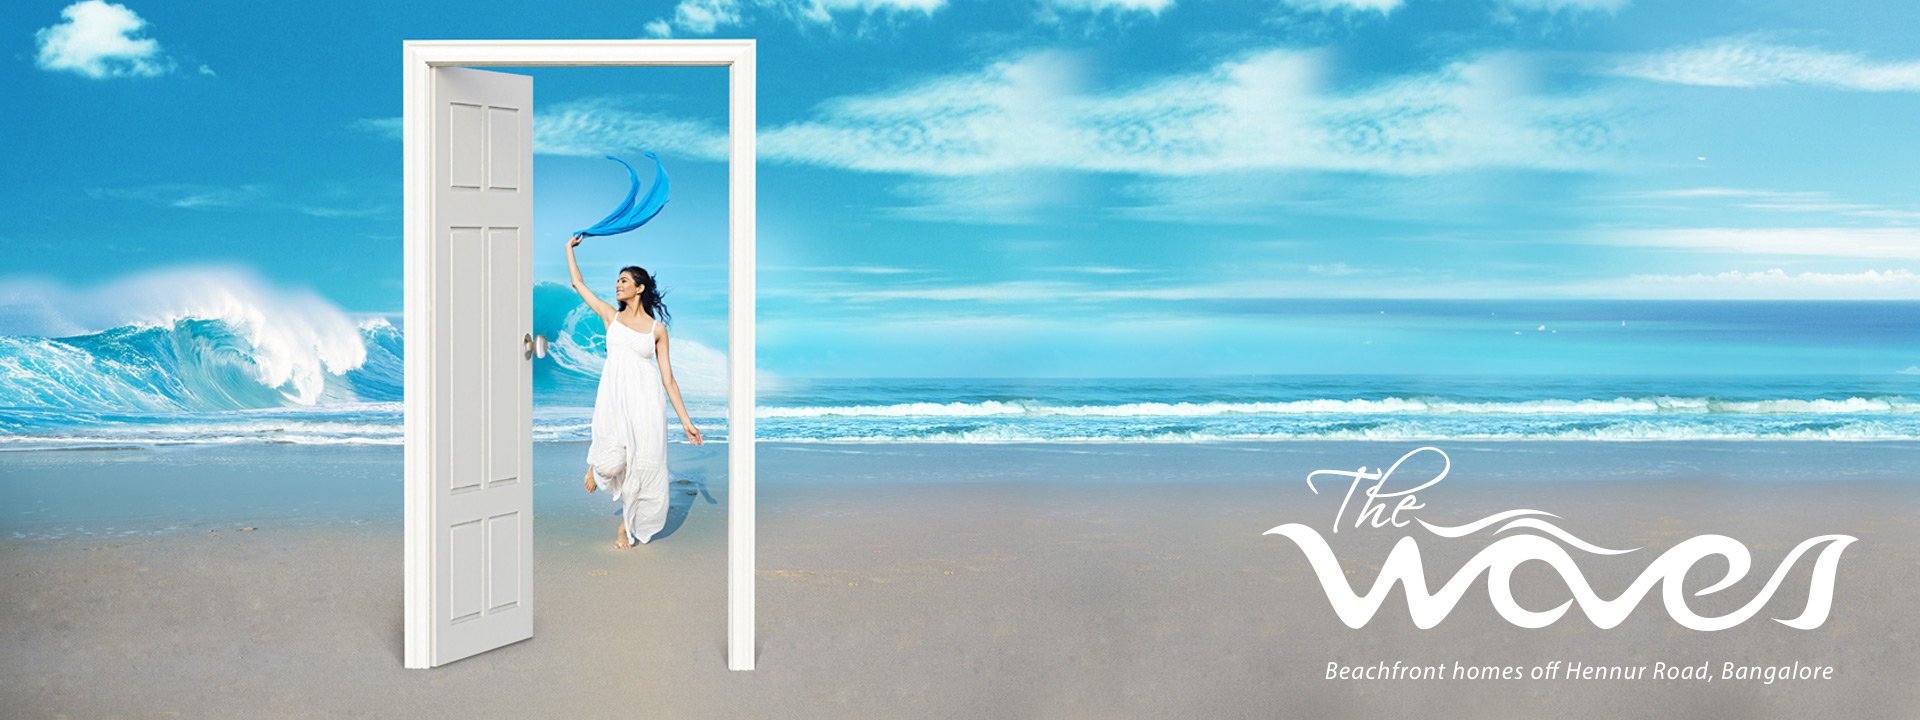 Purva The Waves offers you the landscape of a beach and tropical backwaters to your door step Update